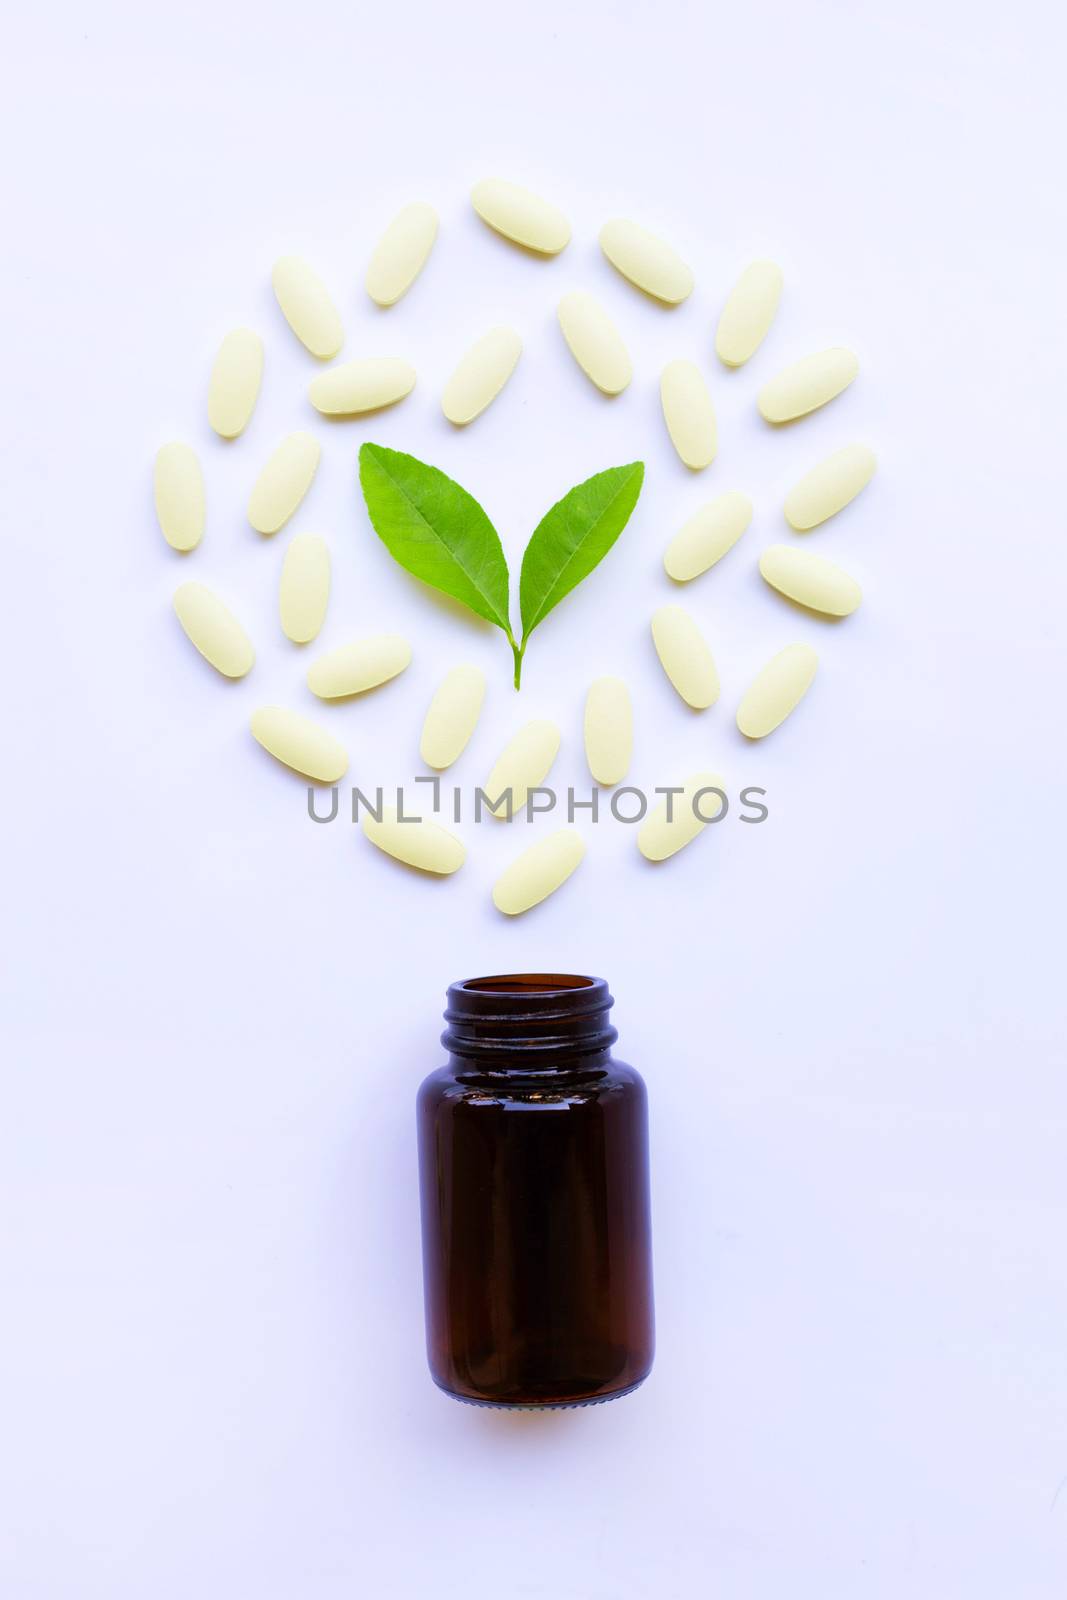 Vitamin C bottle and pills with green leavs on white  by Bowonpat